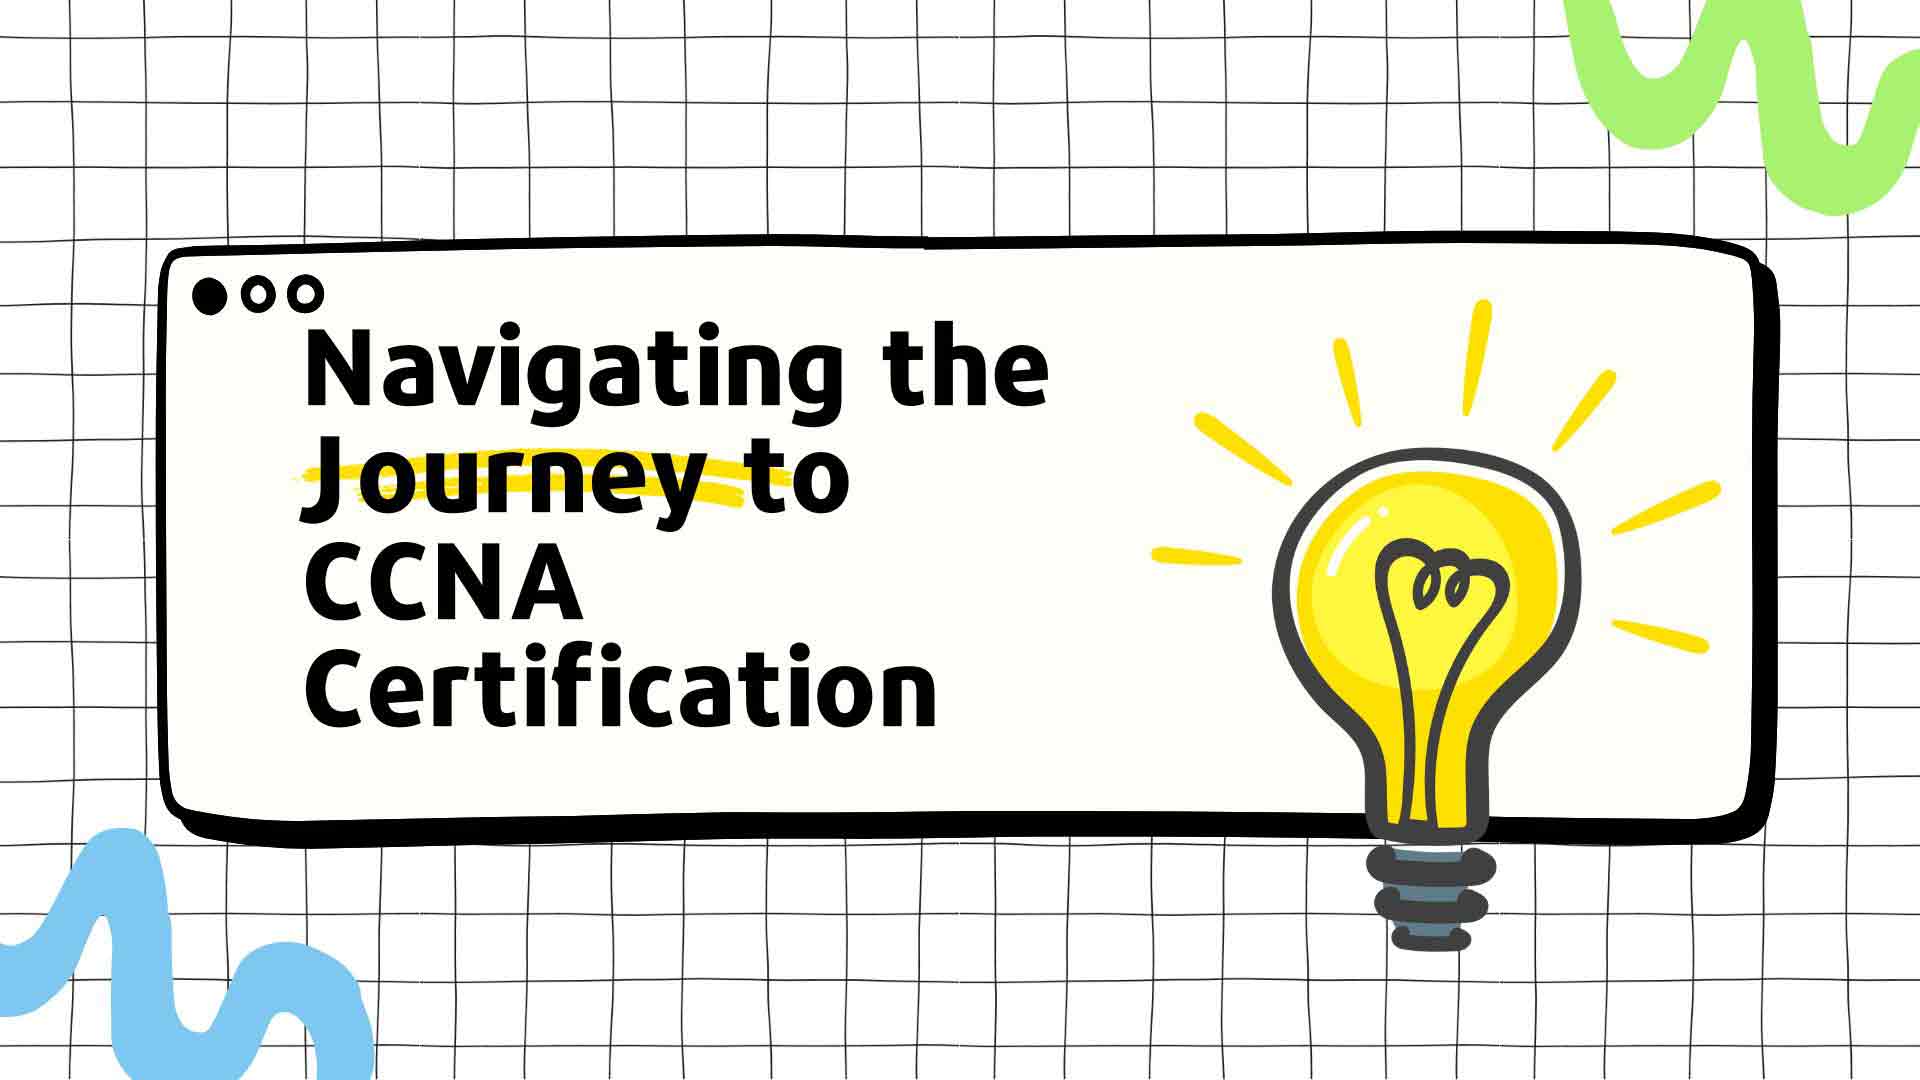 Navigating the Journey to CCNA Certification